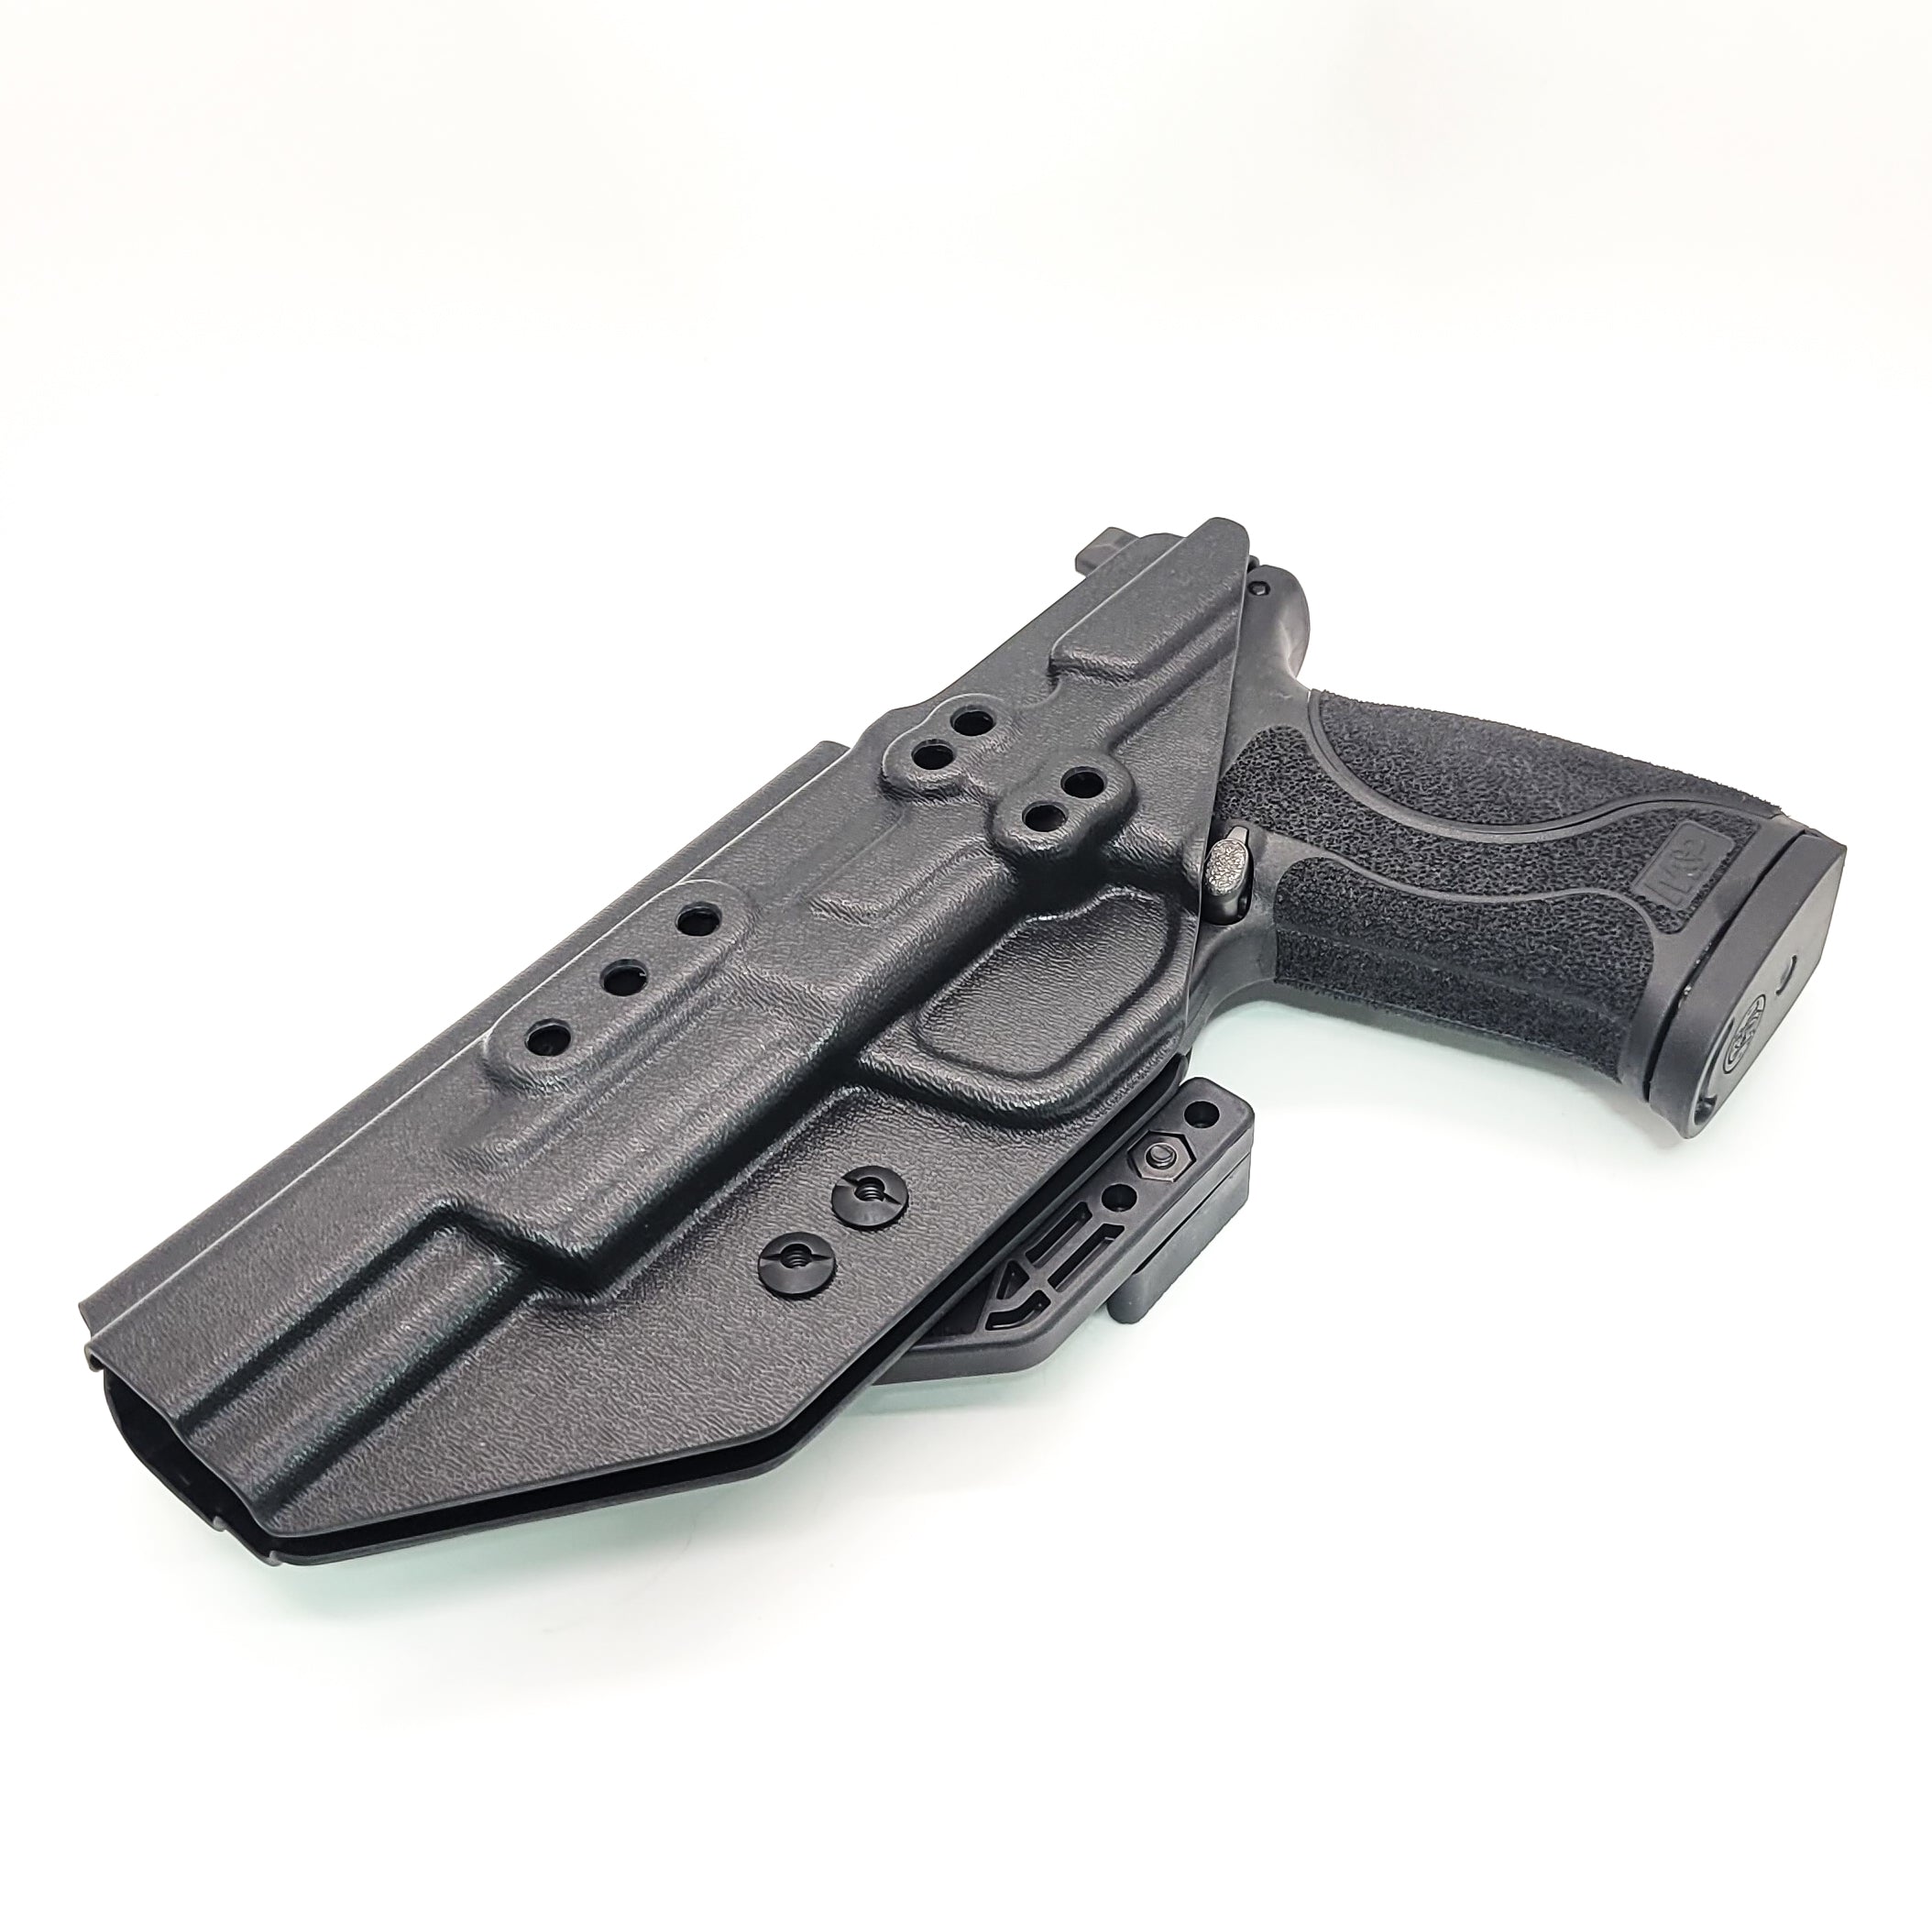 For the Best IWB AIWB Inside Waistband Kydex Taco Holster designed to fit the Smith and Wesson M&P 5.6" Performance Center 10MM M2.0 pistol with thumb safety, shop Four Brothers Holsters. Full sweat guard, adjustable retention, profiled for a red dot sight. Proudly made in the USA for veterans and law enforcement.